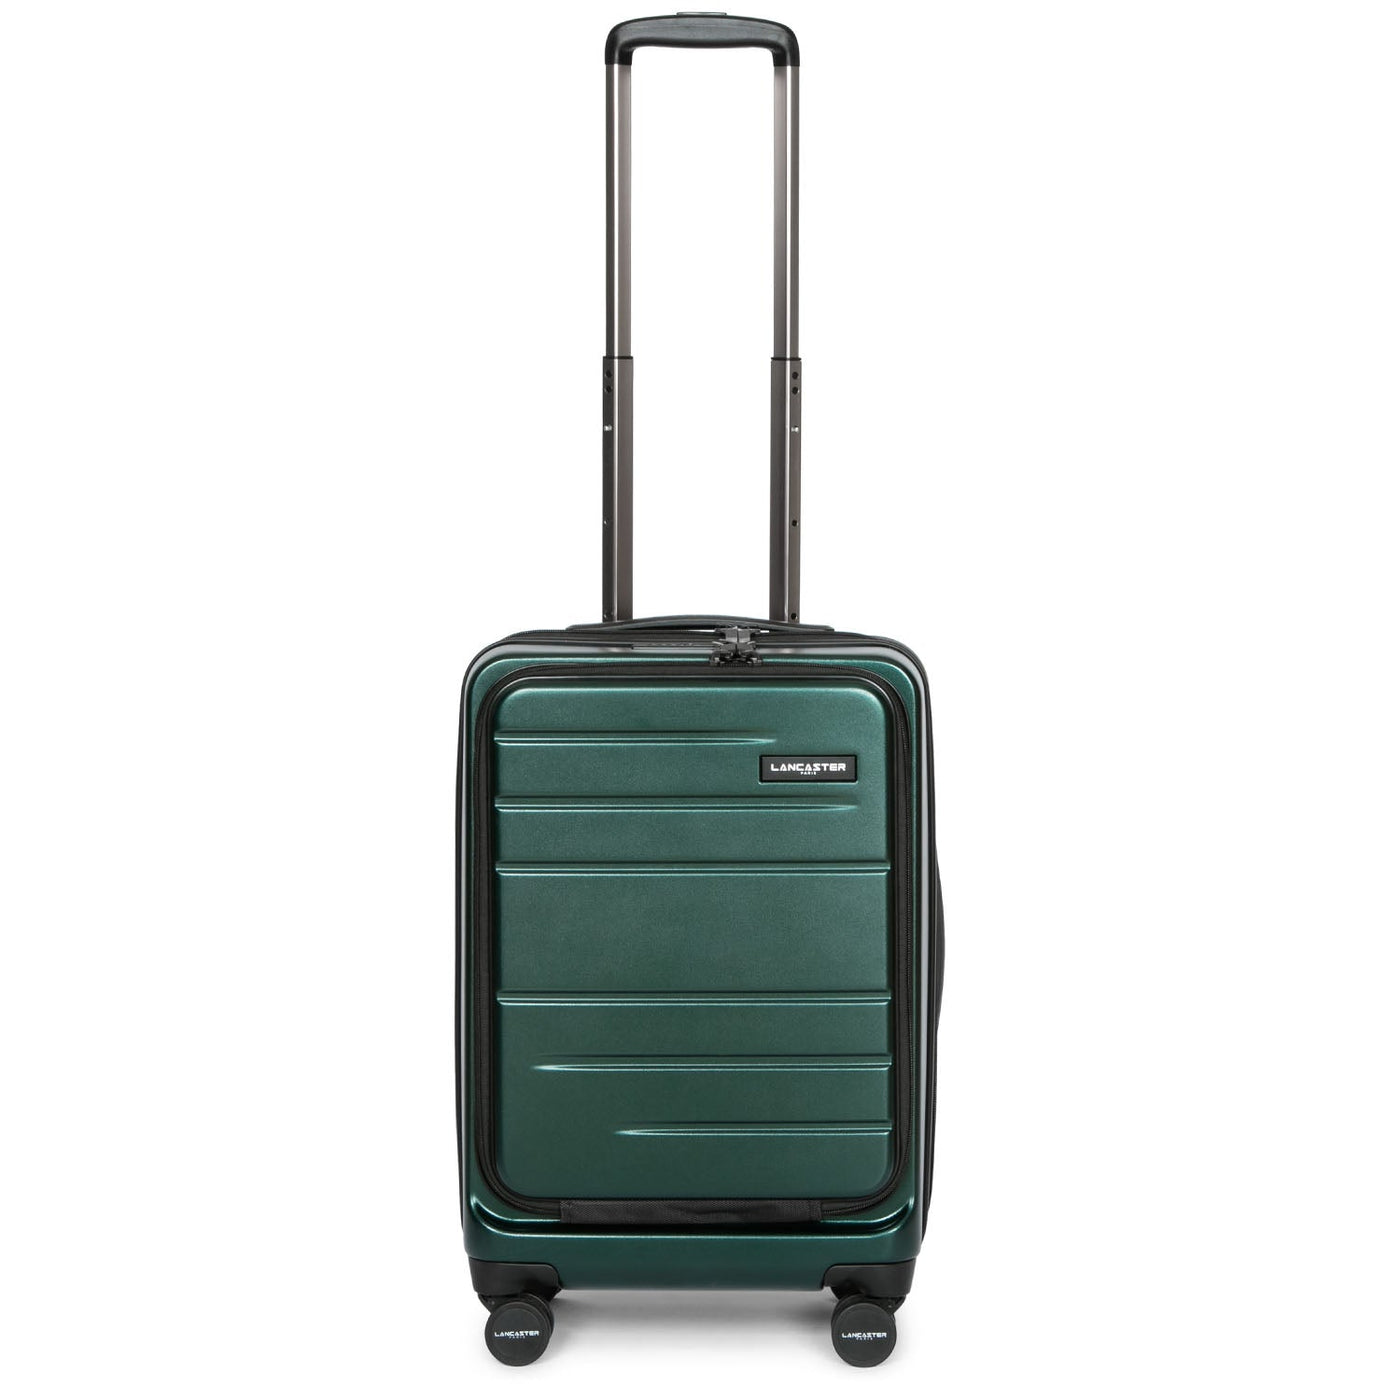 cabin luggage - luggage #couleur_vert